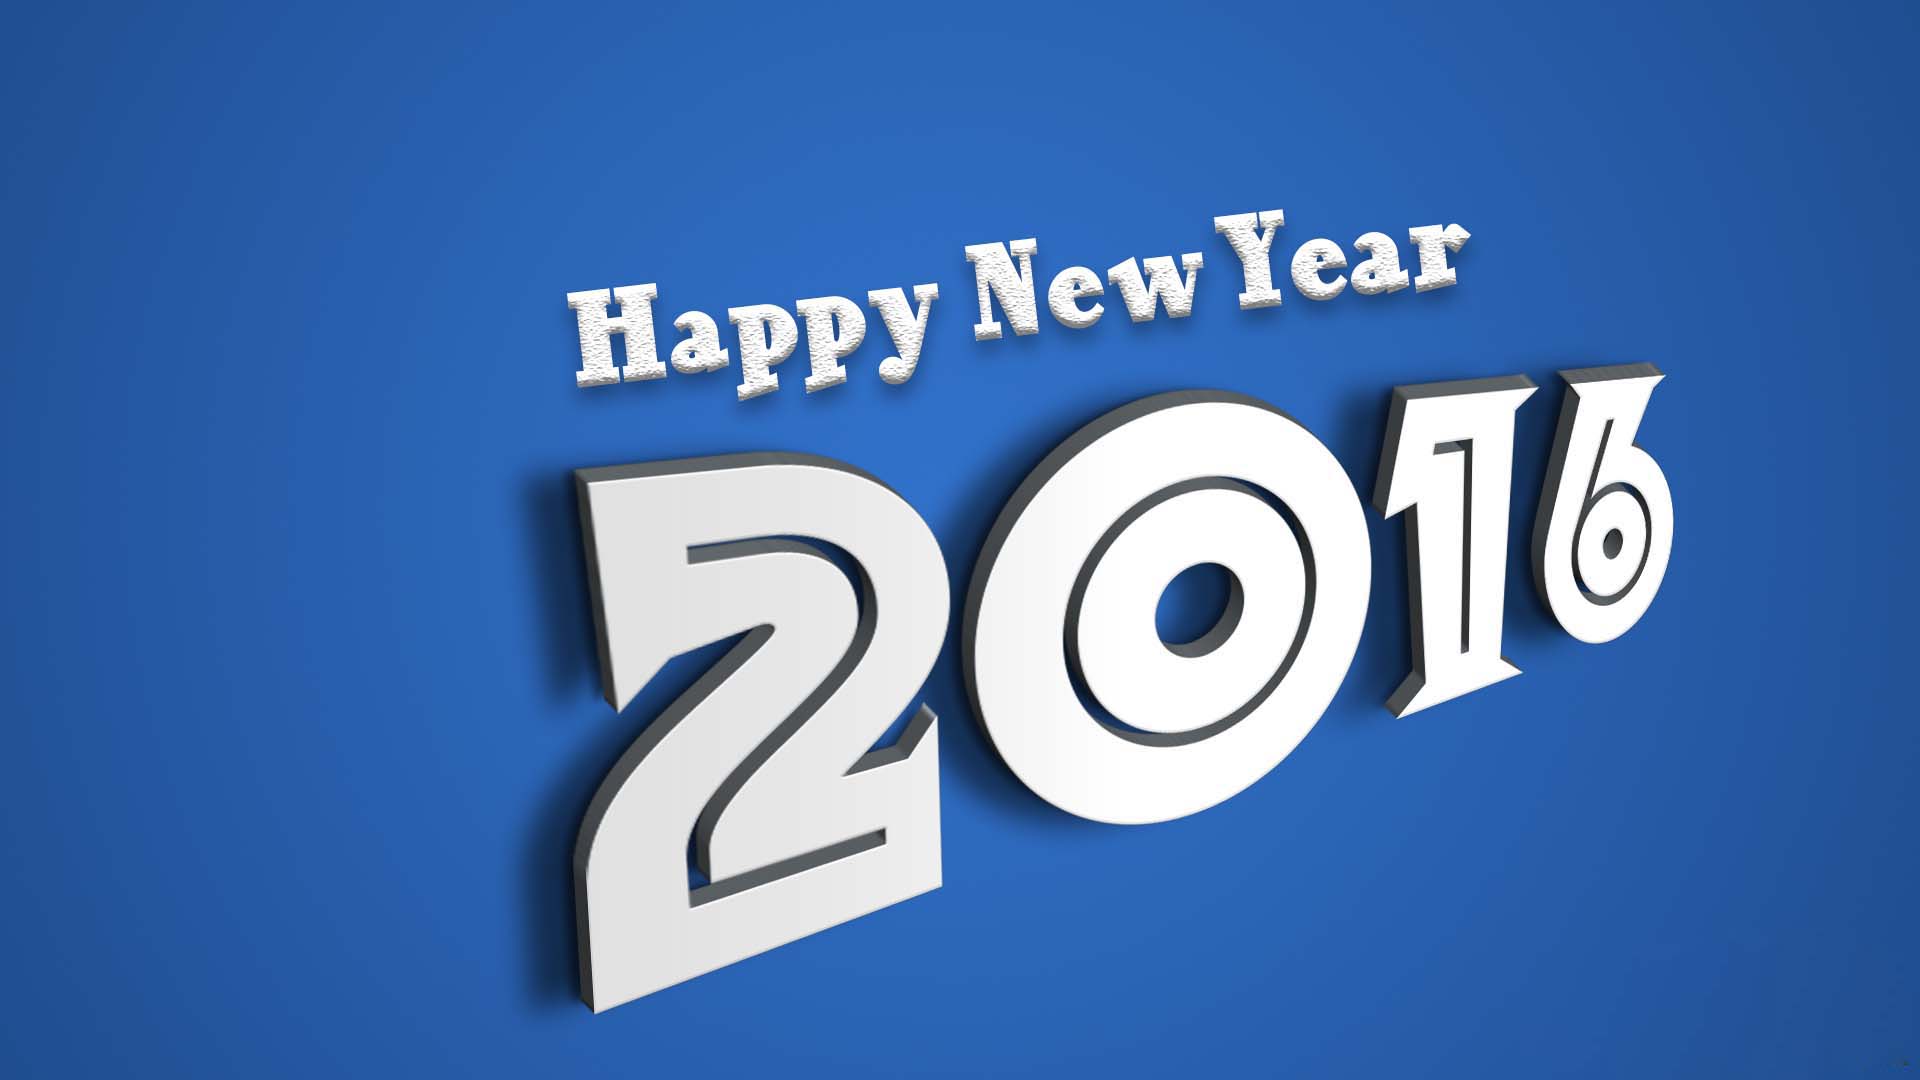 New Year 2016 Wallpaper, background and Windows 10 Theme